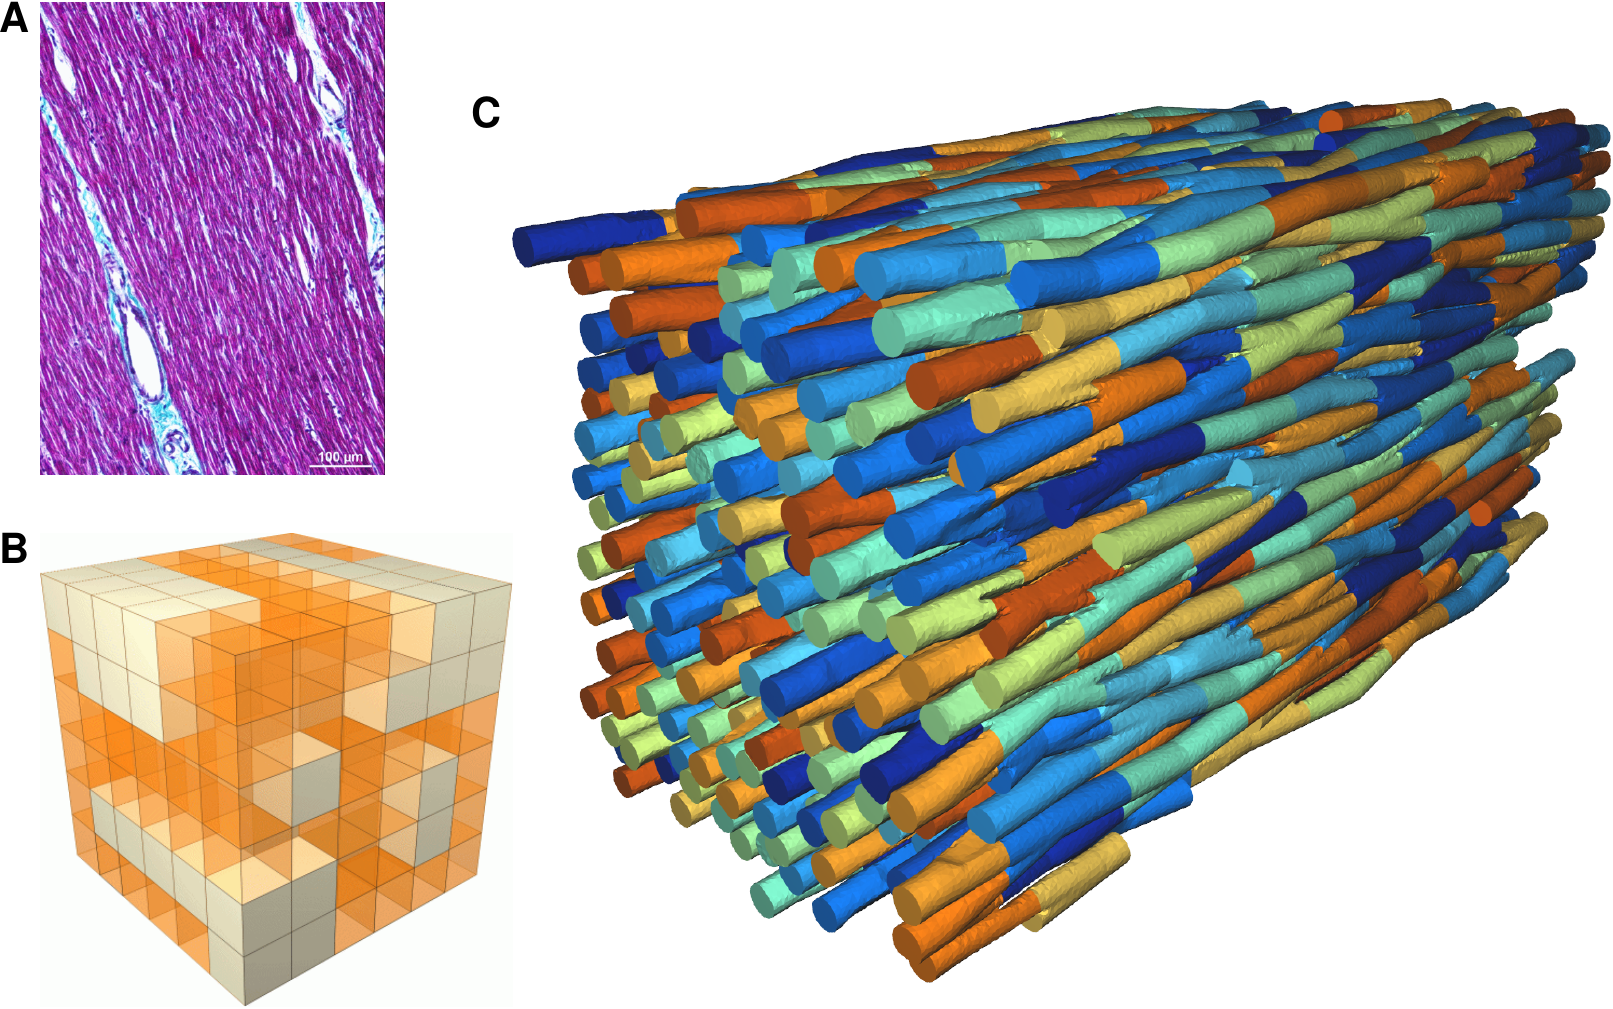 Image of the microstructure from histology, current, insufficient, representation of microstructural defects, and foreseen geometry to be used in microscopic models.